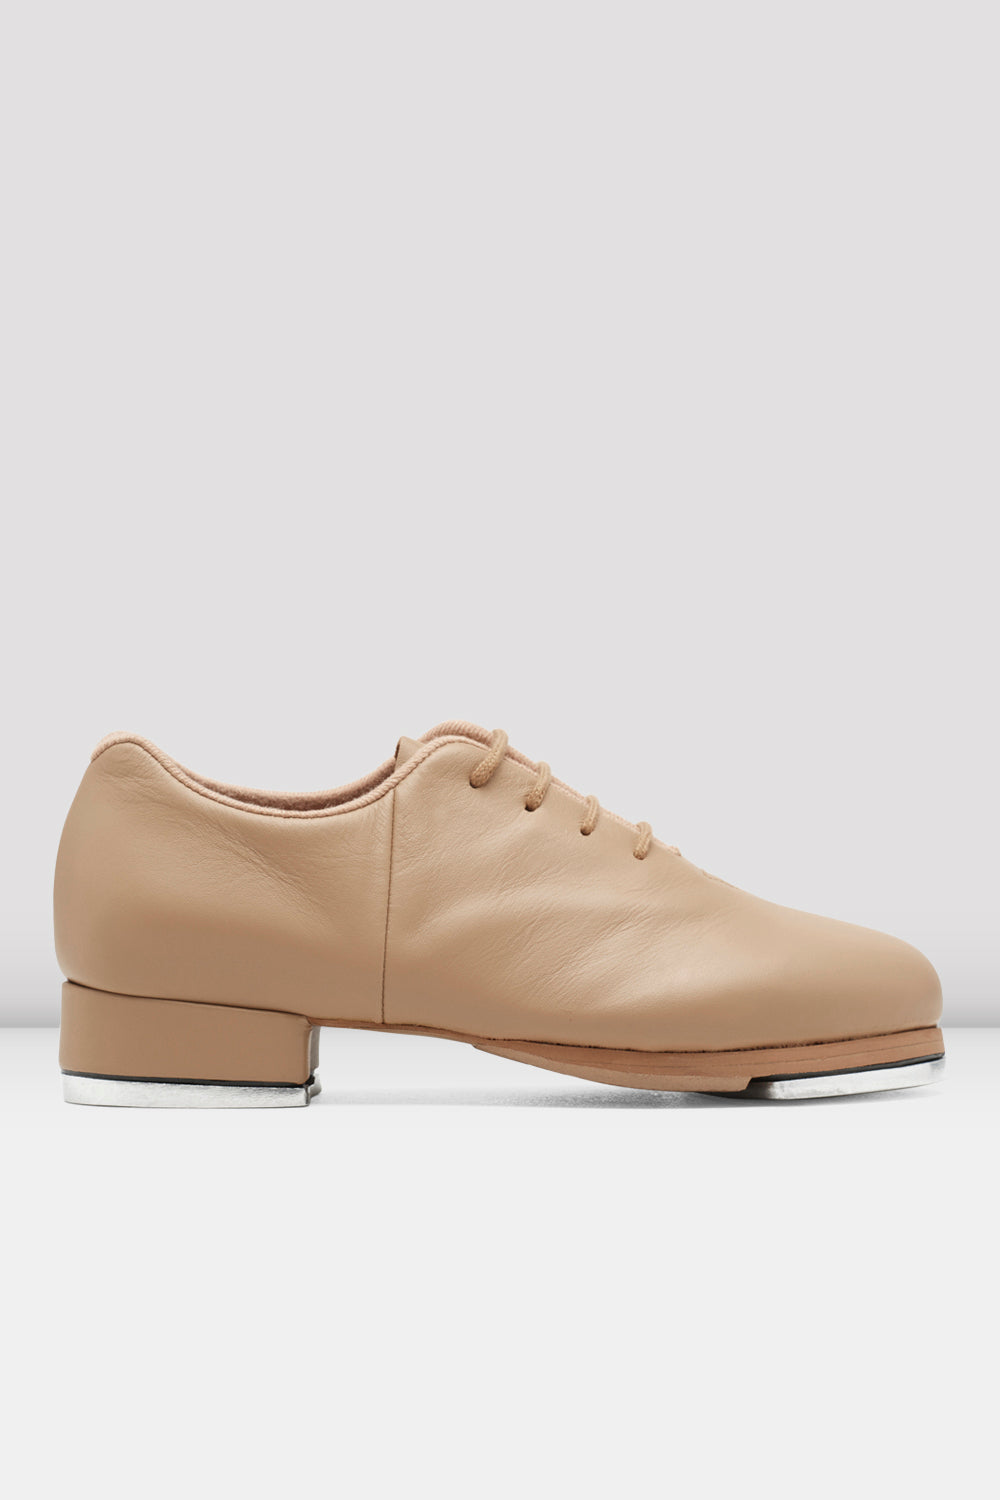 BLOCH Ladies Sync Tap Leather Tap Shoes, Tan Leather